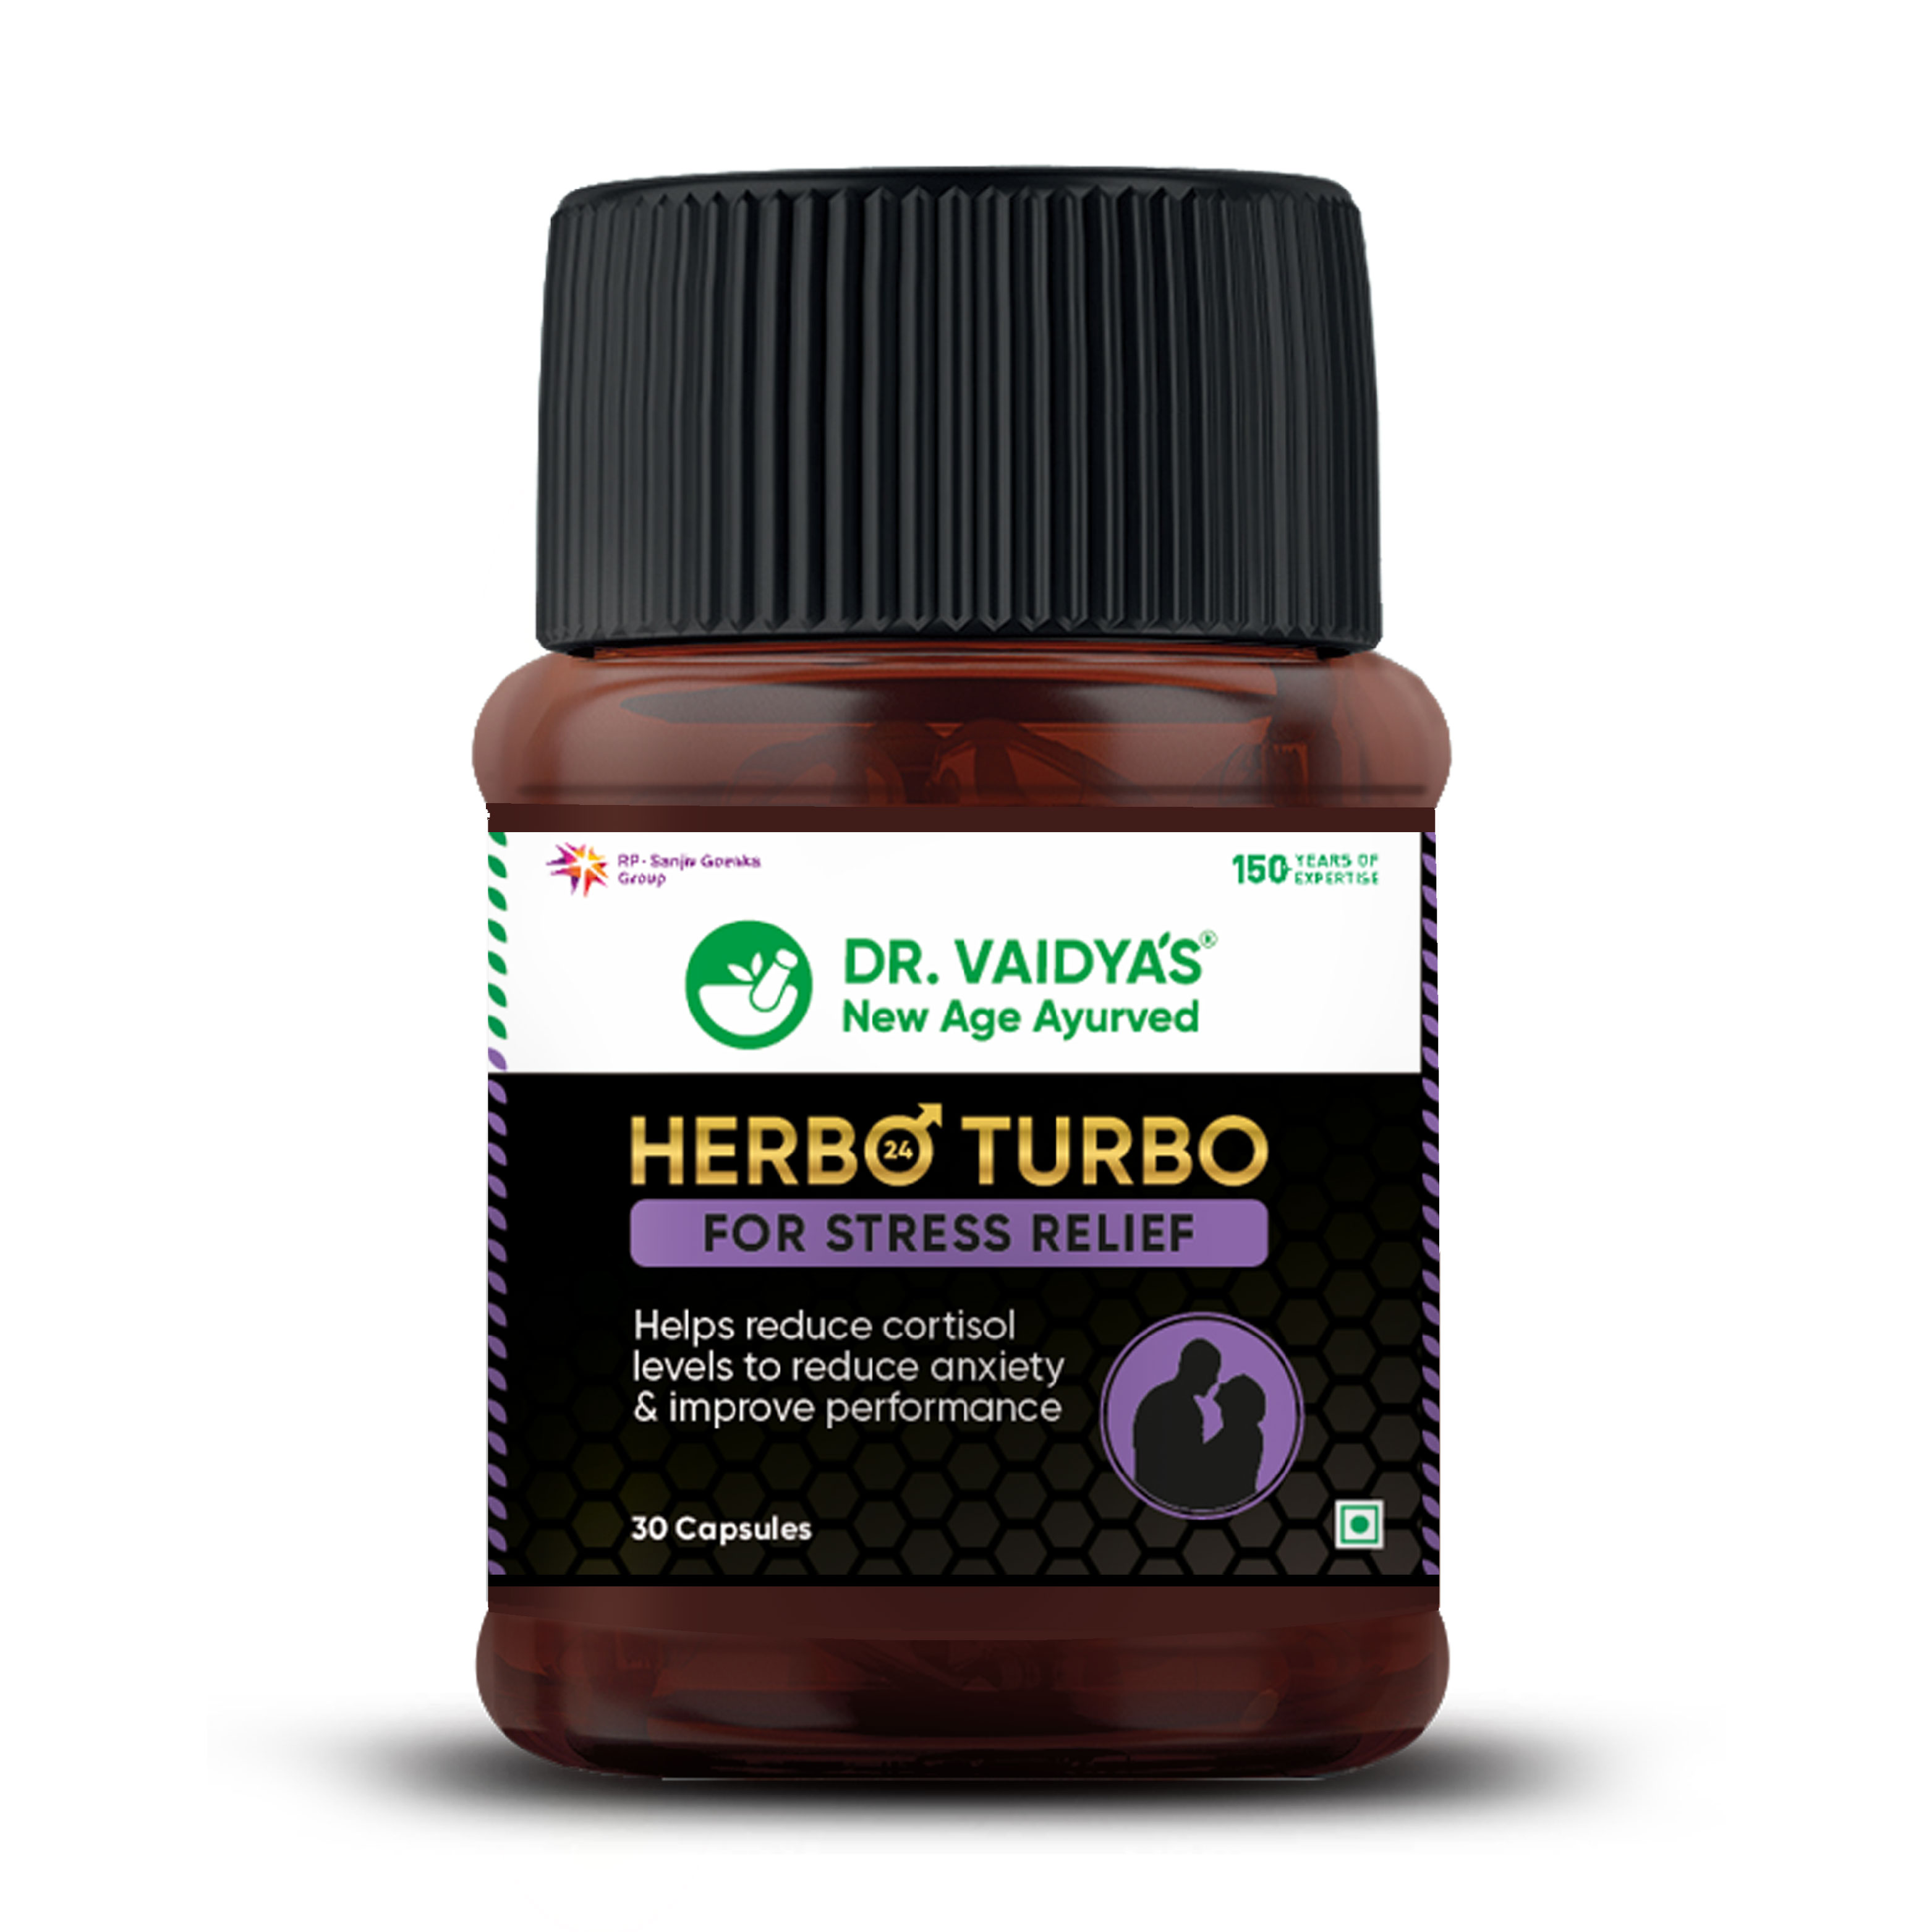 Dr Vaidya's Herbo24Turbo Made For Stress Relief